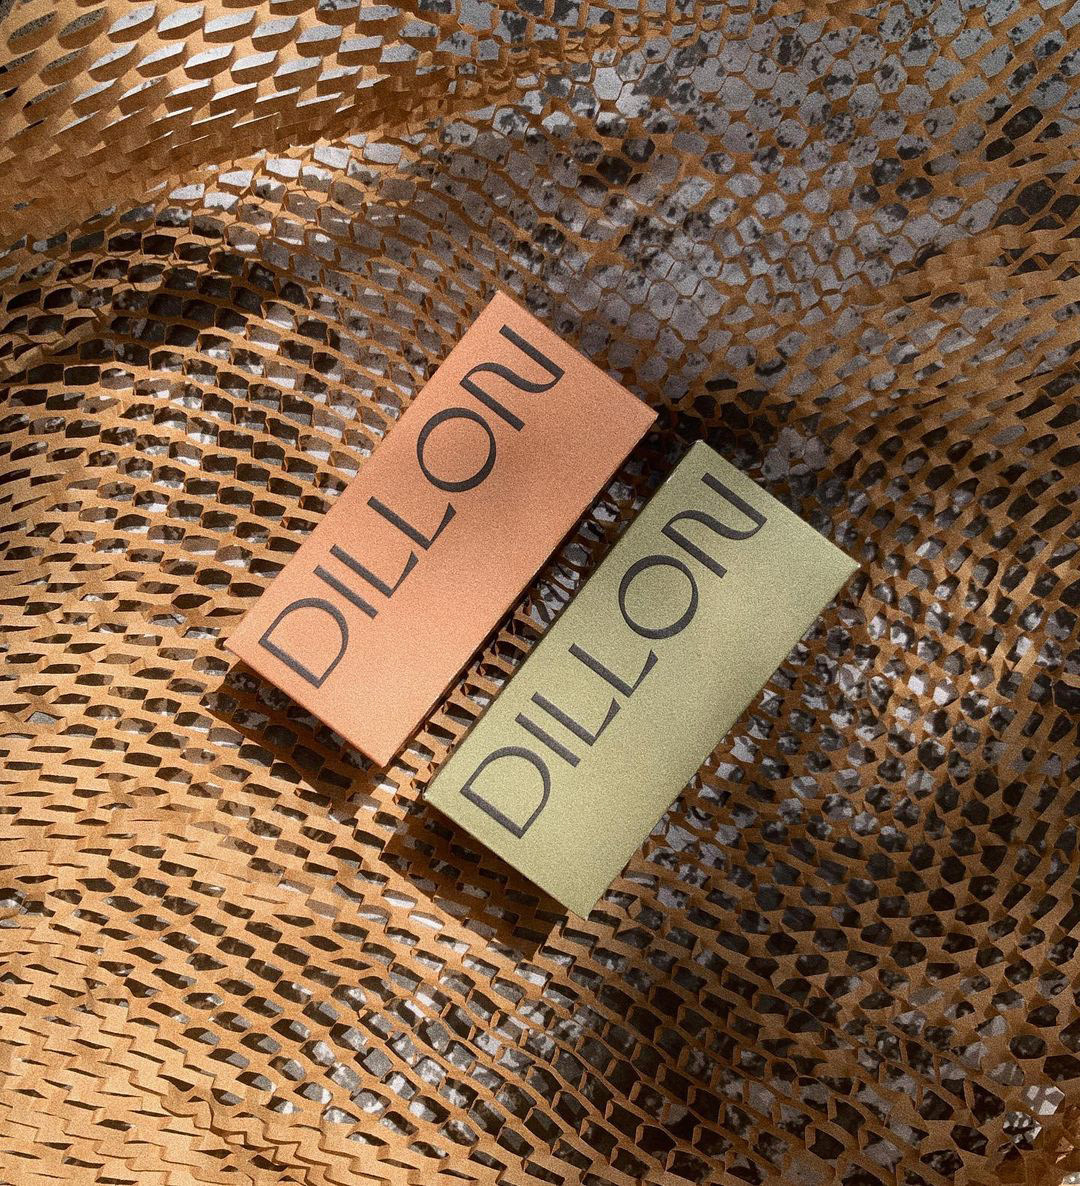 Two product boxes with Dillon typography, peach and green, sit against paper mesh